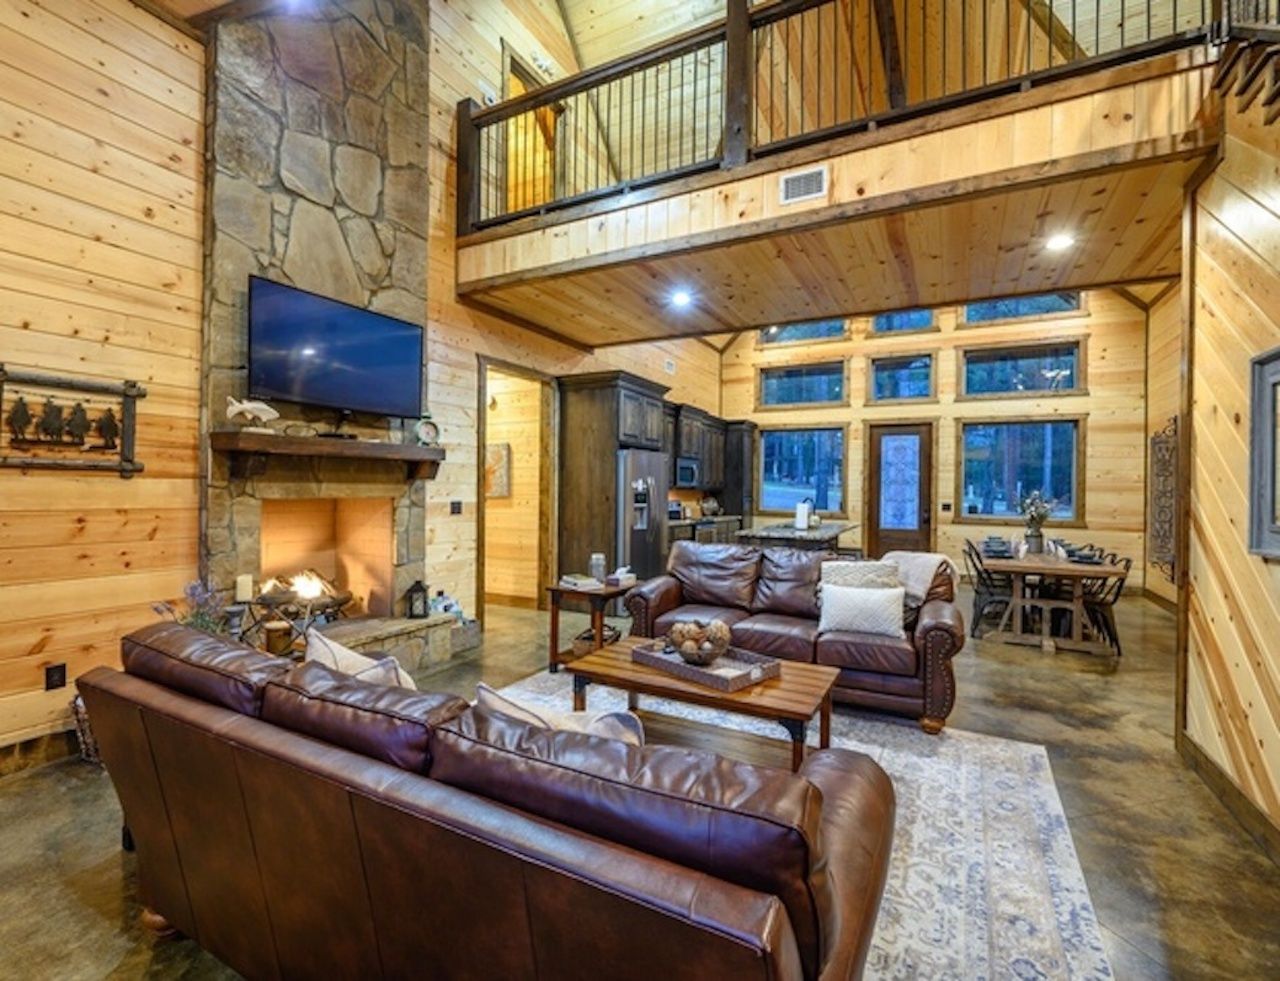 The interior of Blue Beaver Luxury Cabins